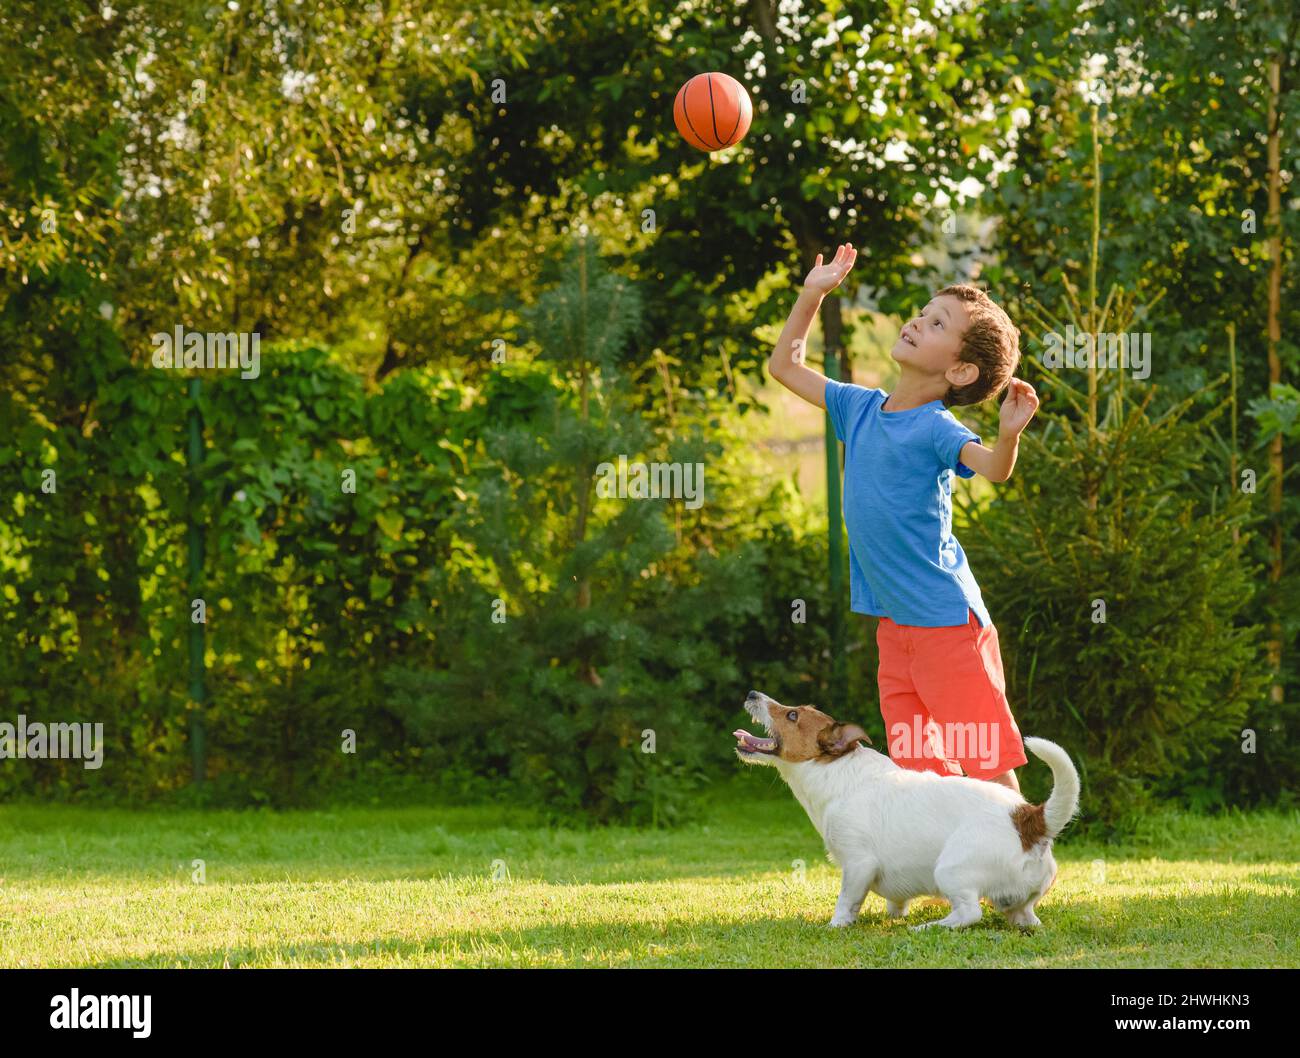 Kid and dog are playing leisure basketball game outdoors on summer day Stock Photo